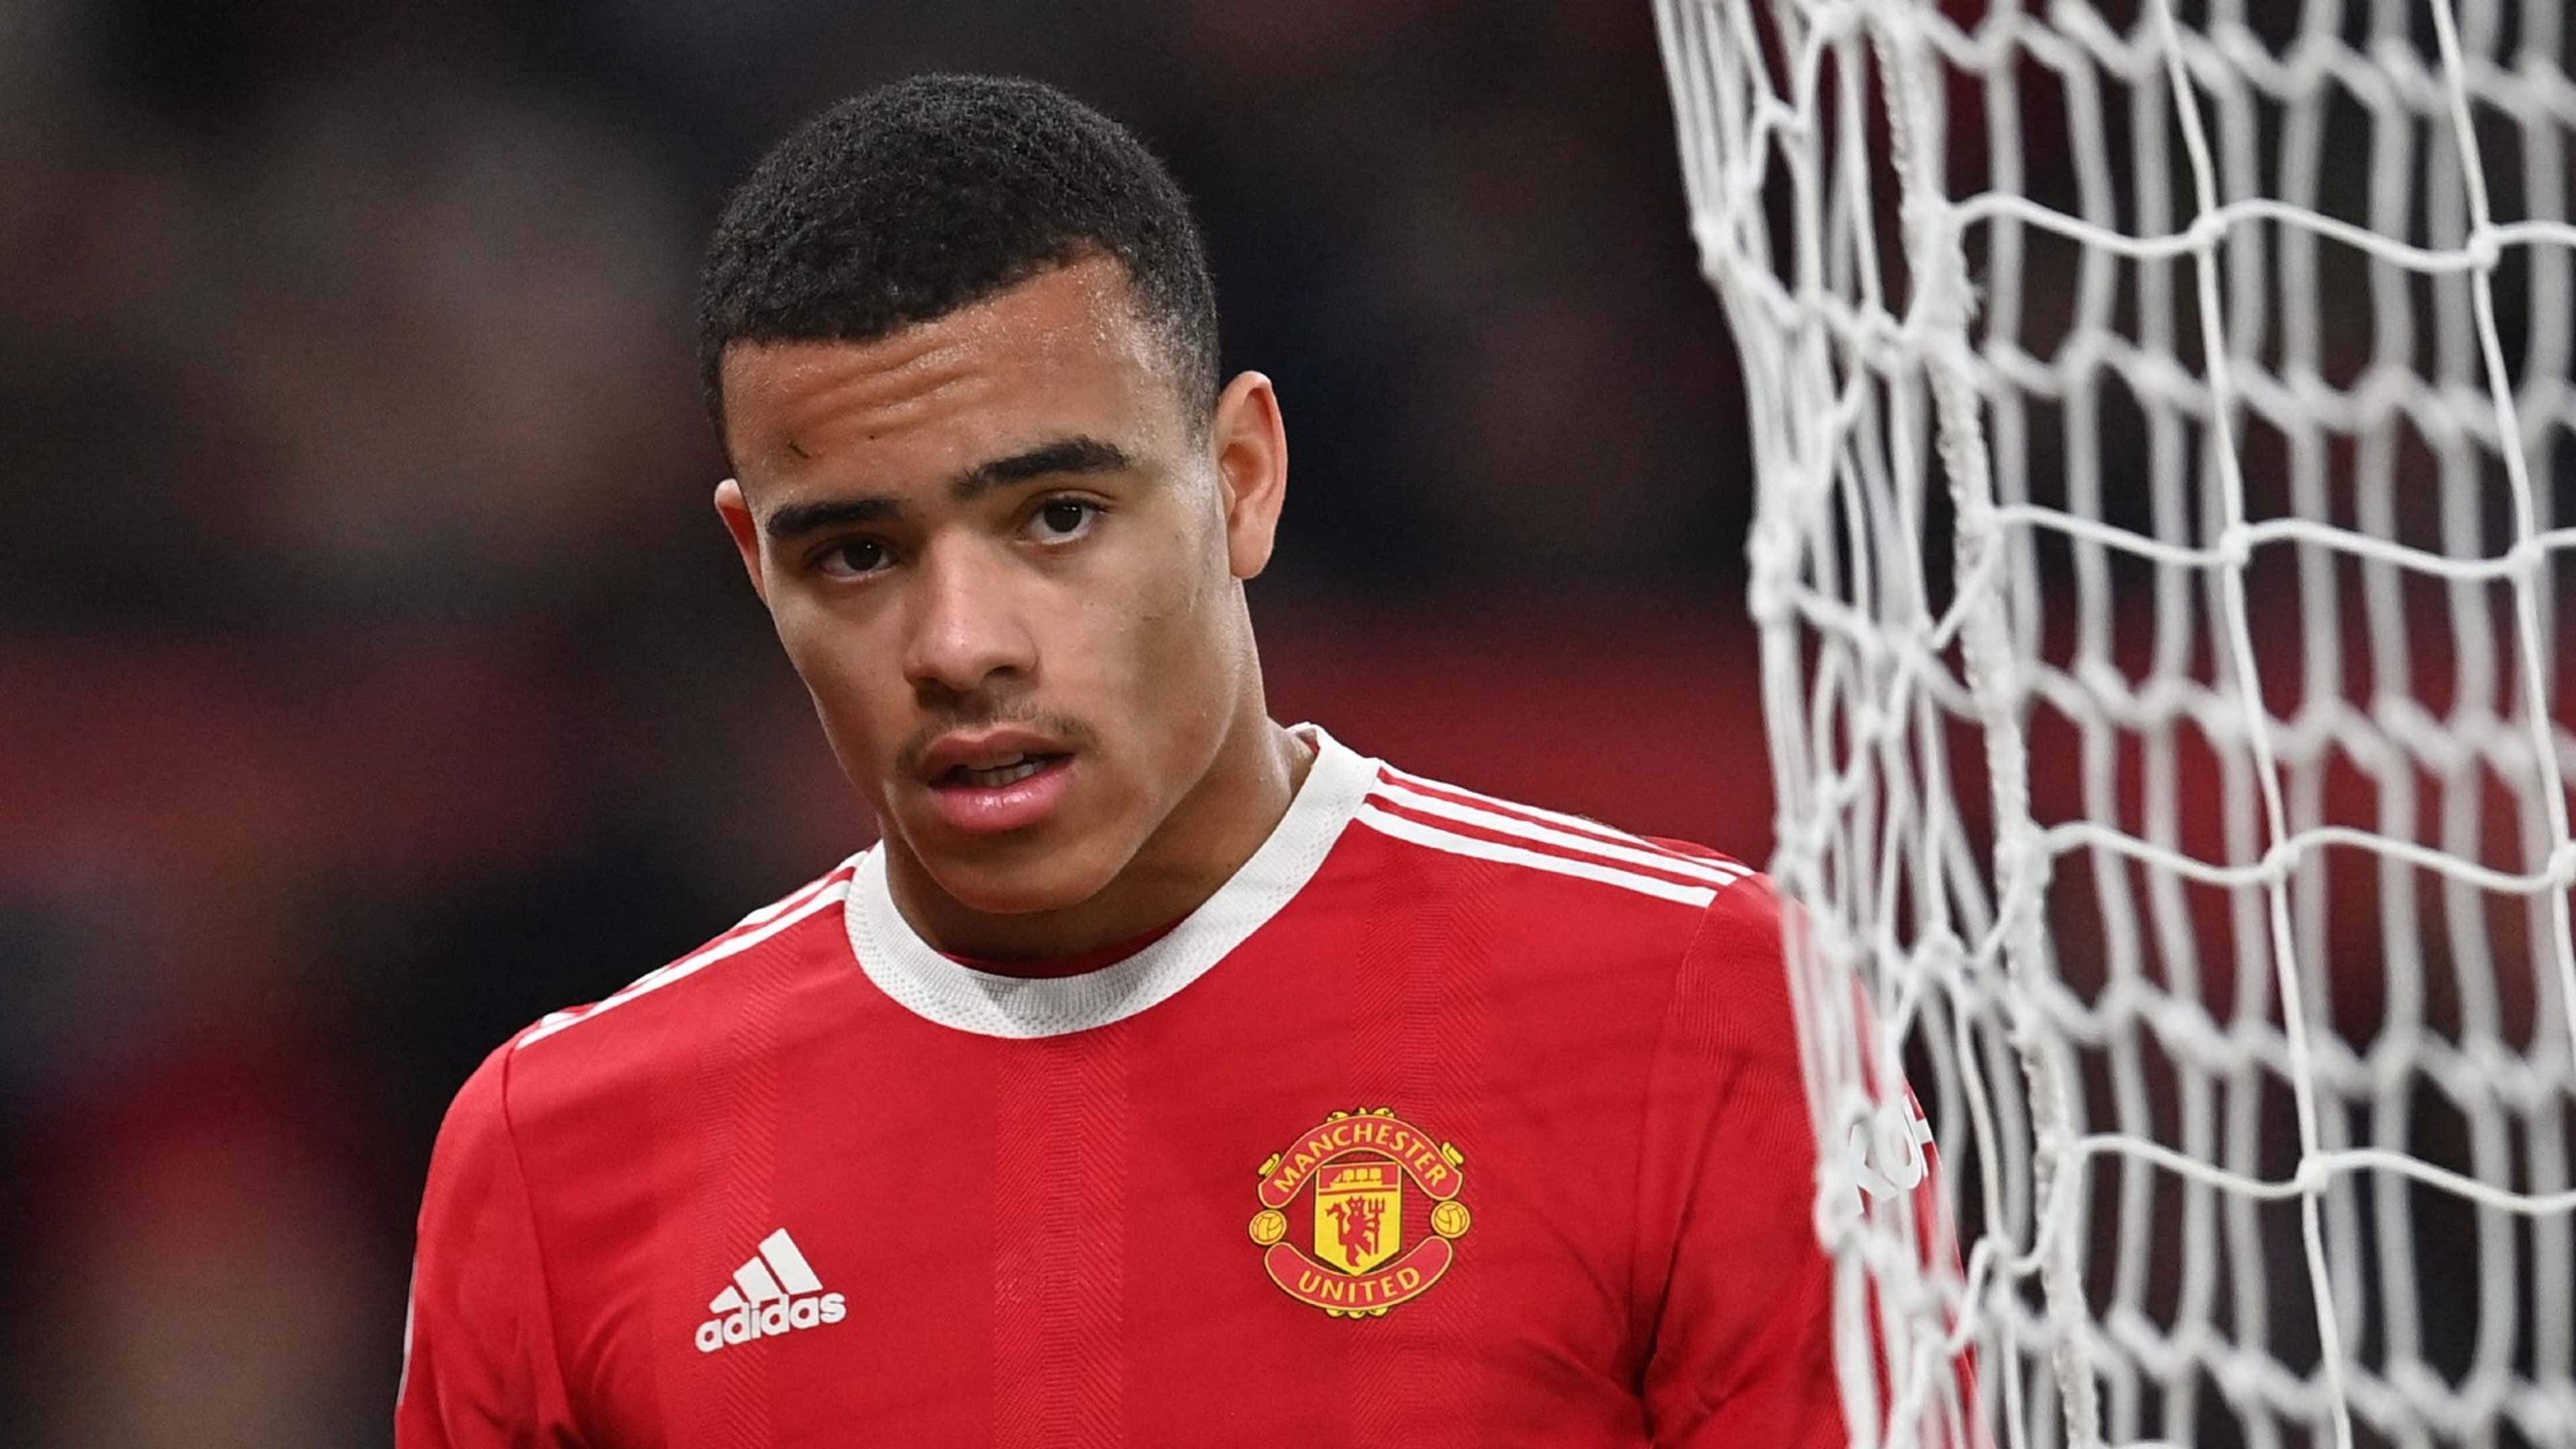 Mason Greenwood listed as first-team player on Man Utd's website but it  remains unclear if suspension has now been dropped